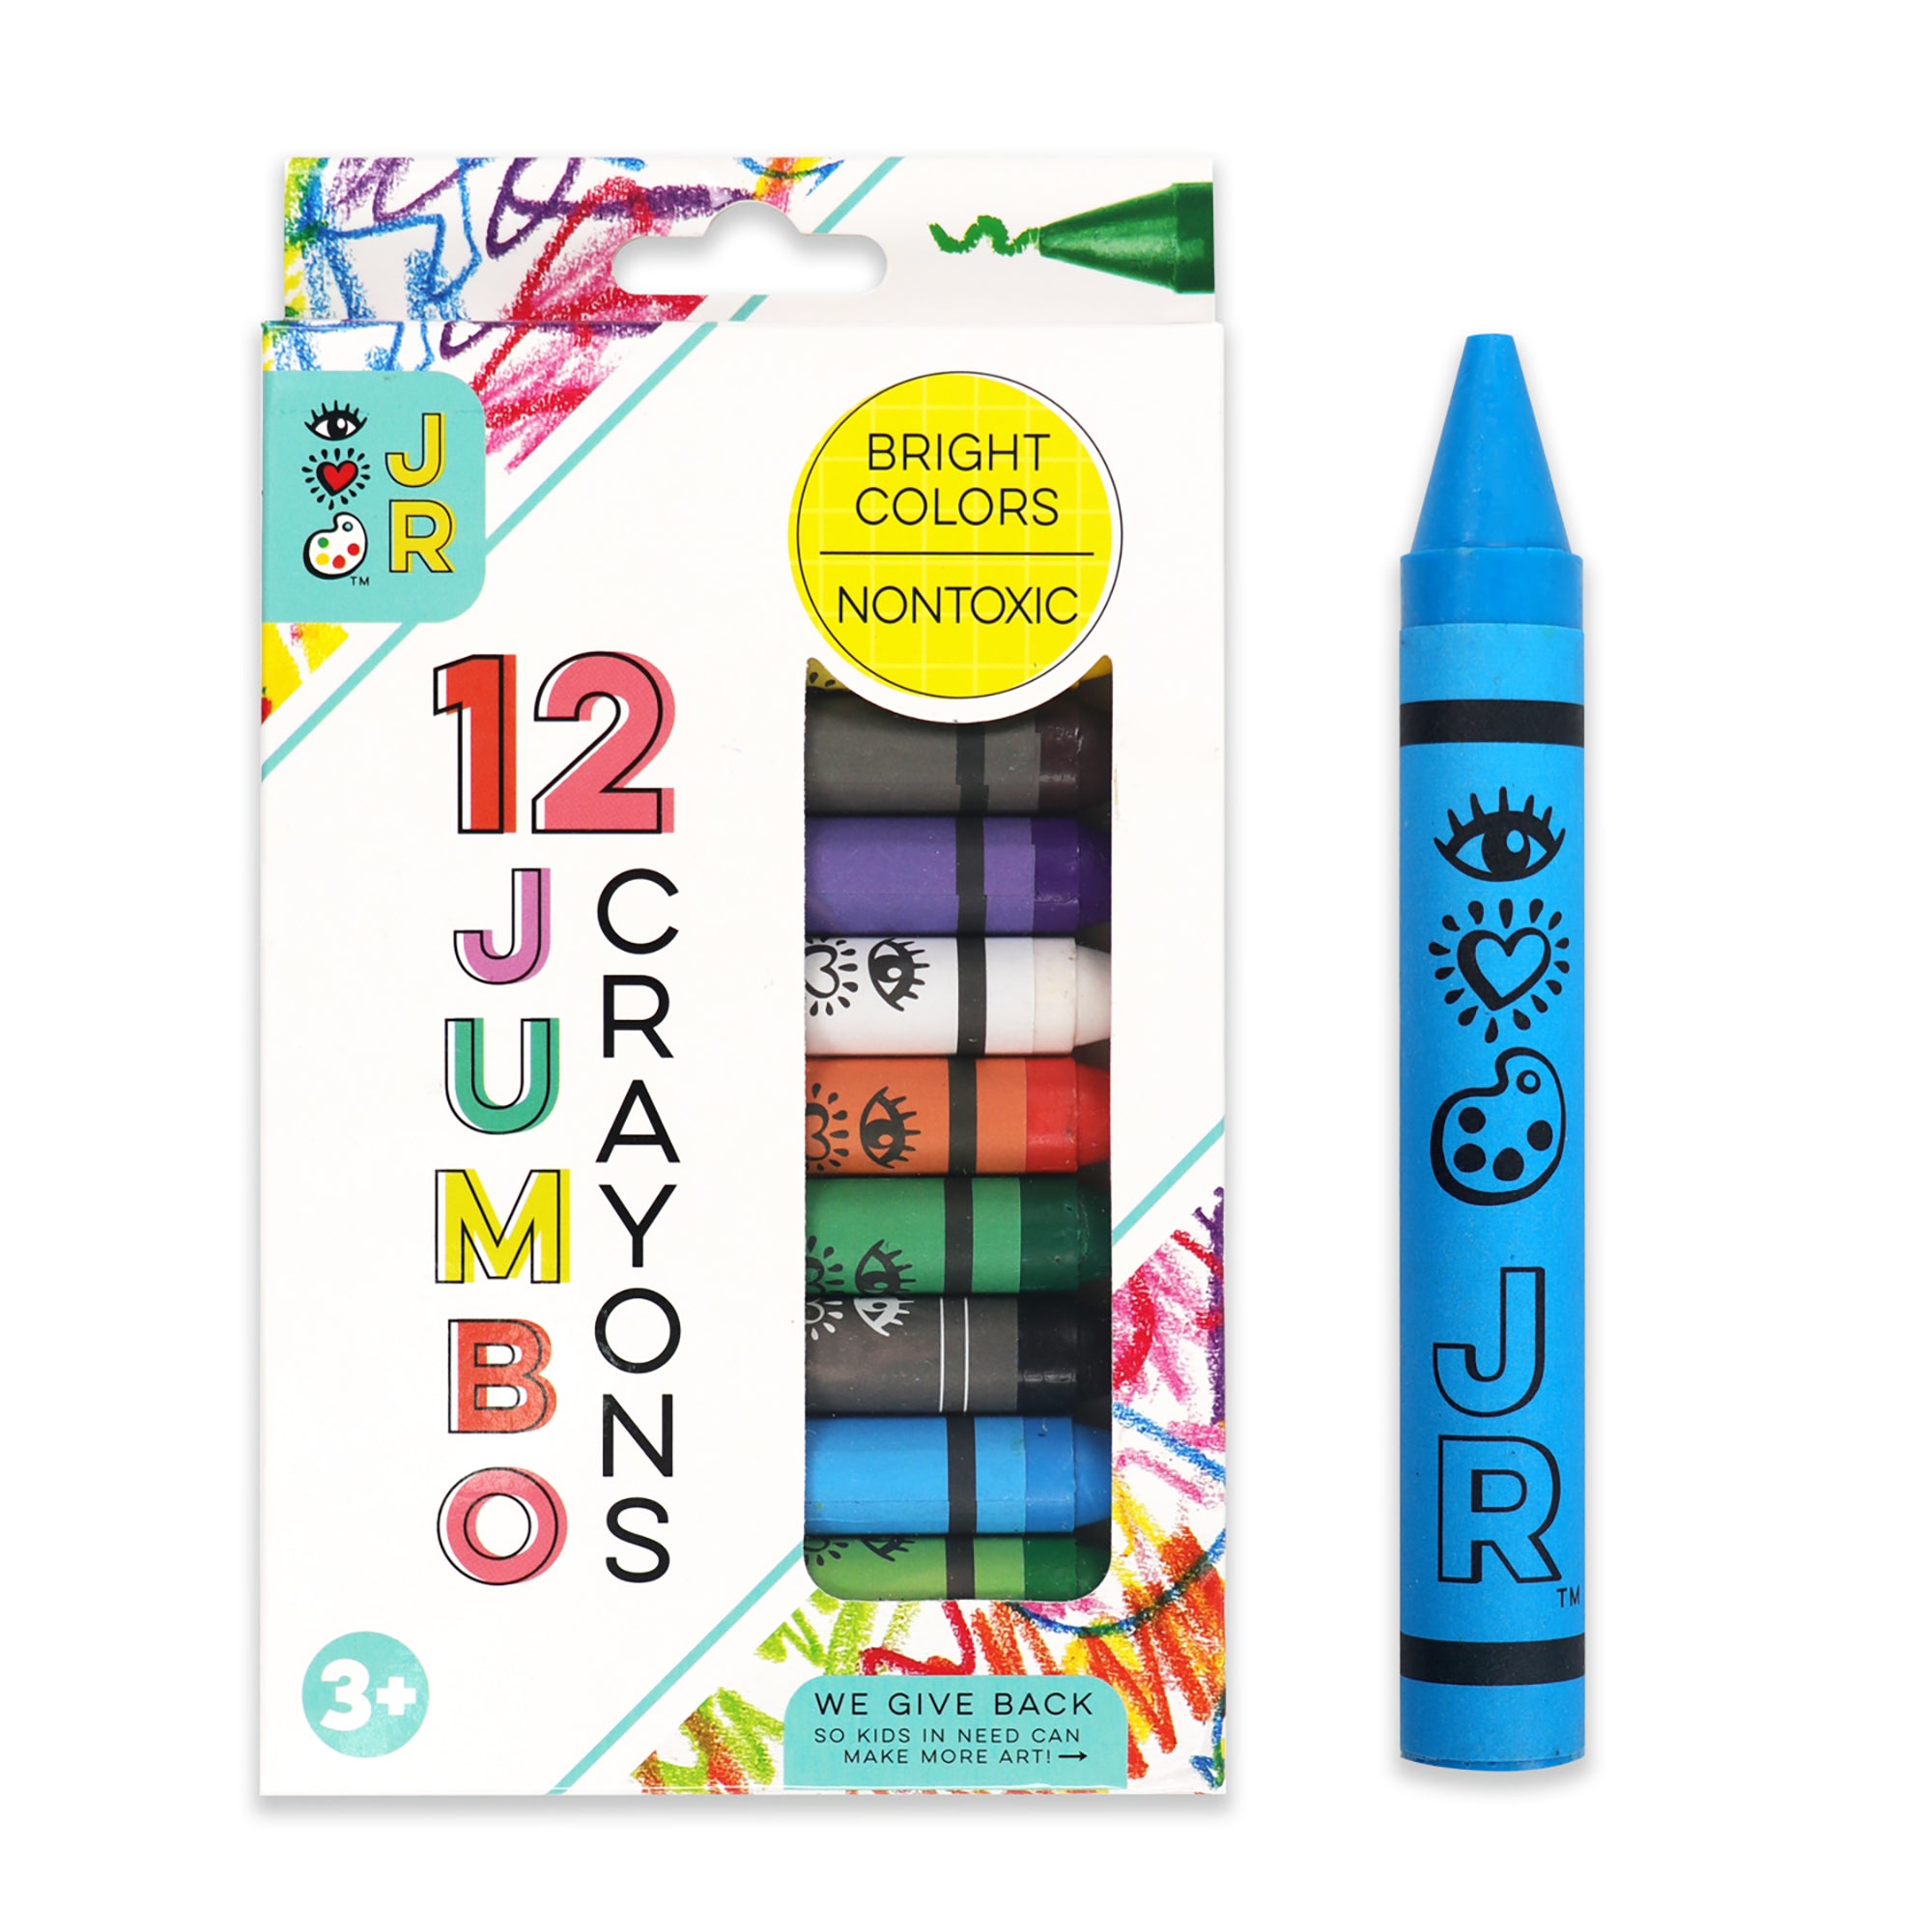 Bright Stripes House of Crayons with Coloring Book